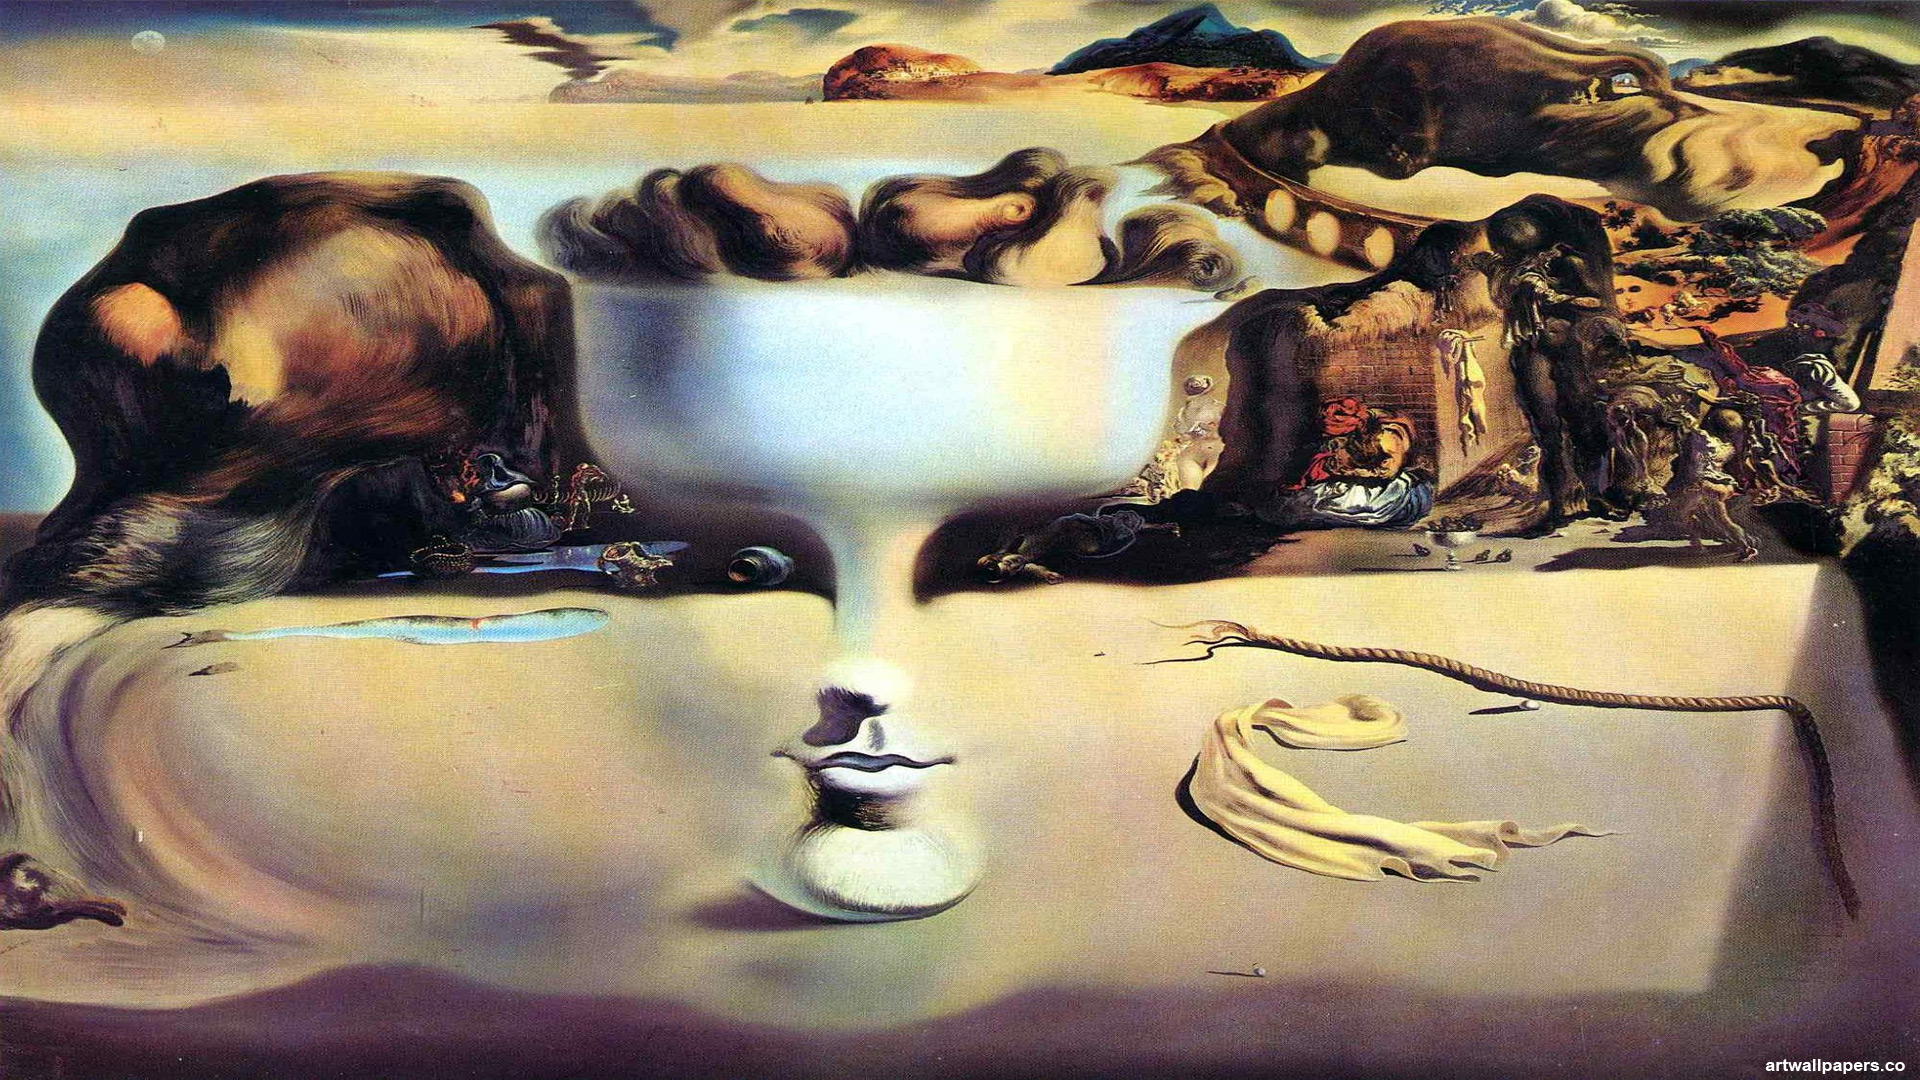 Salvador Dali Wallpapers 1080p - Salvador Dali Apparition Of Face And Fruit Dish On , HD Wallpaper & Backgrounds